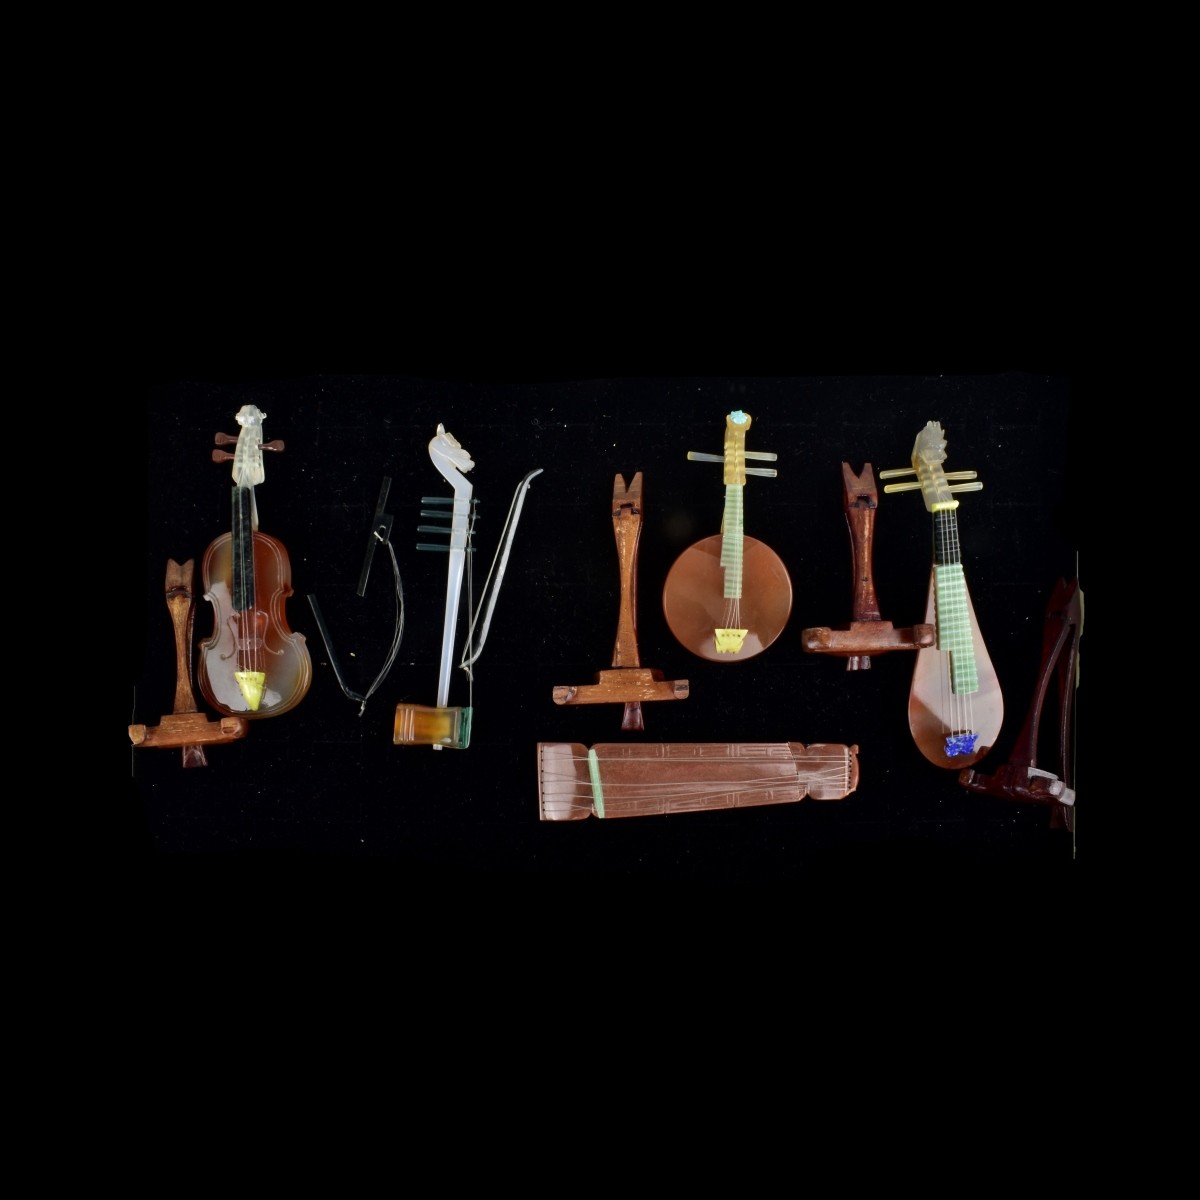 Chinese Carnelian Musical Instruments